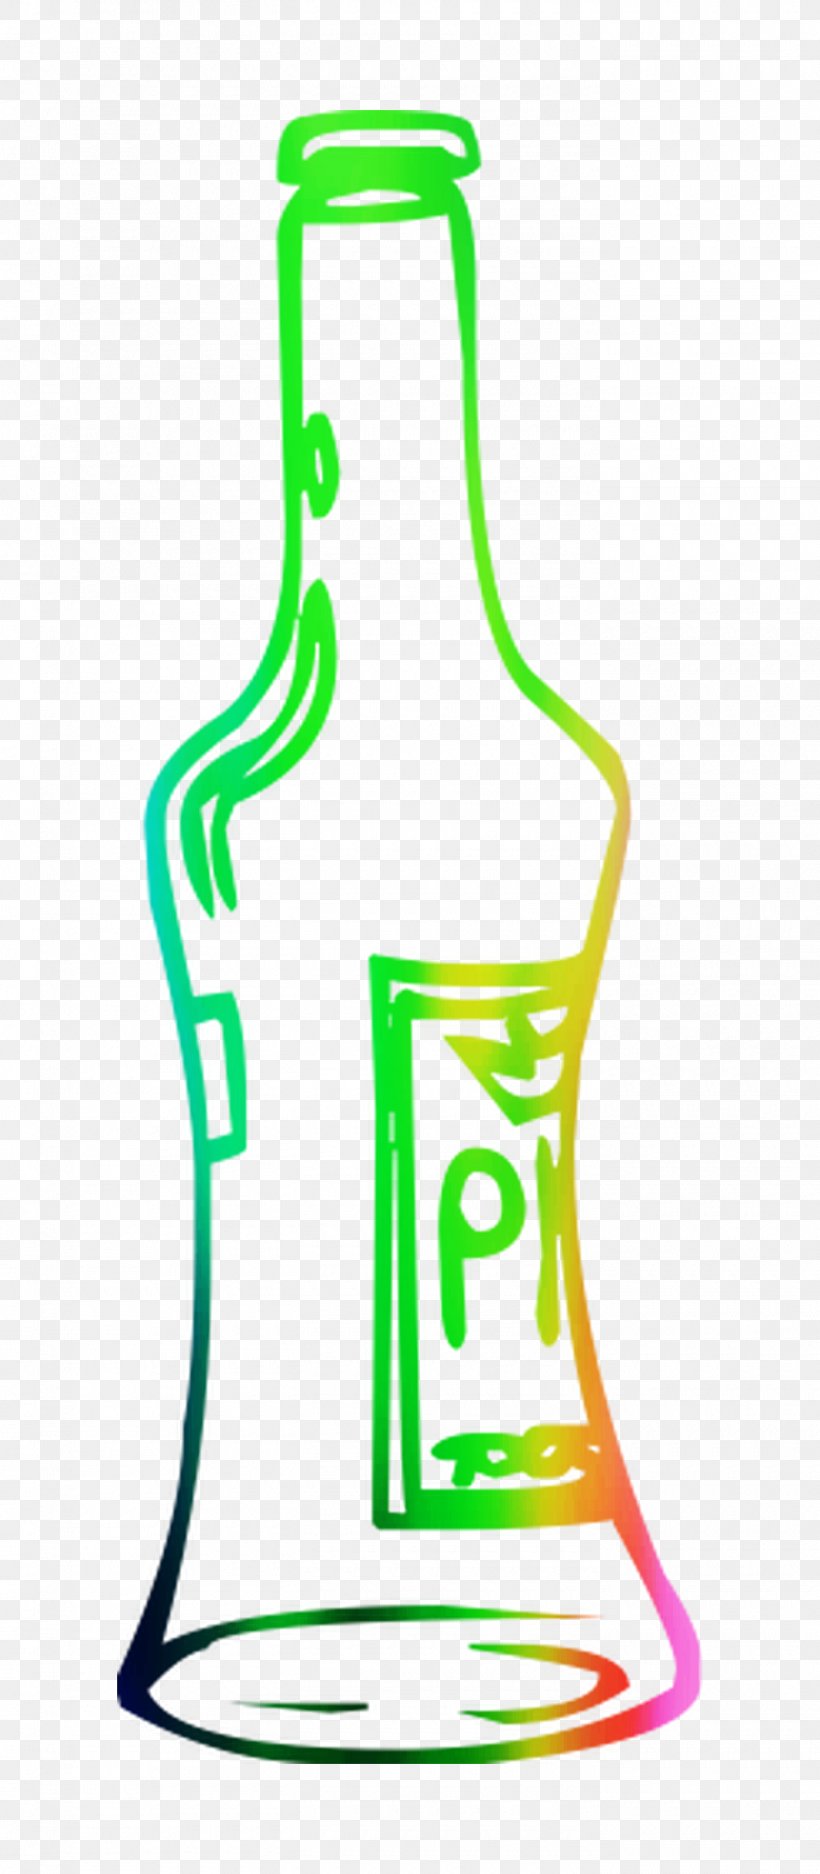 Clothing Green Product Design Clip Art, PNG, 1400x3200px, Clothing, Drinkware, Green Download Free